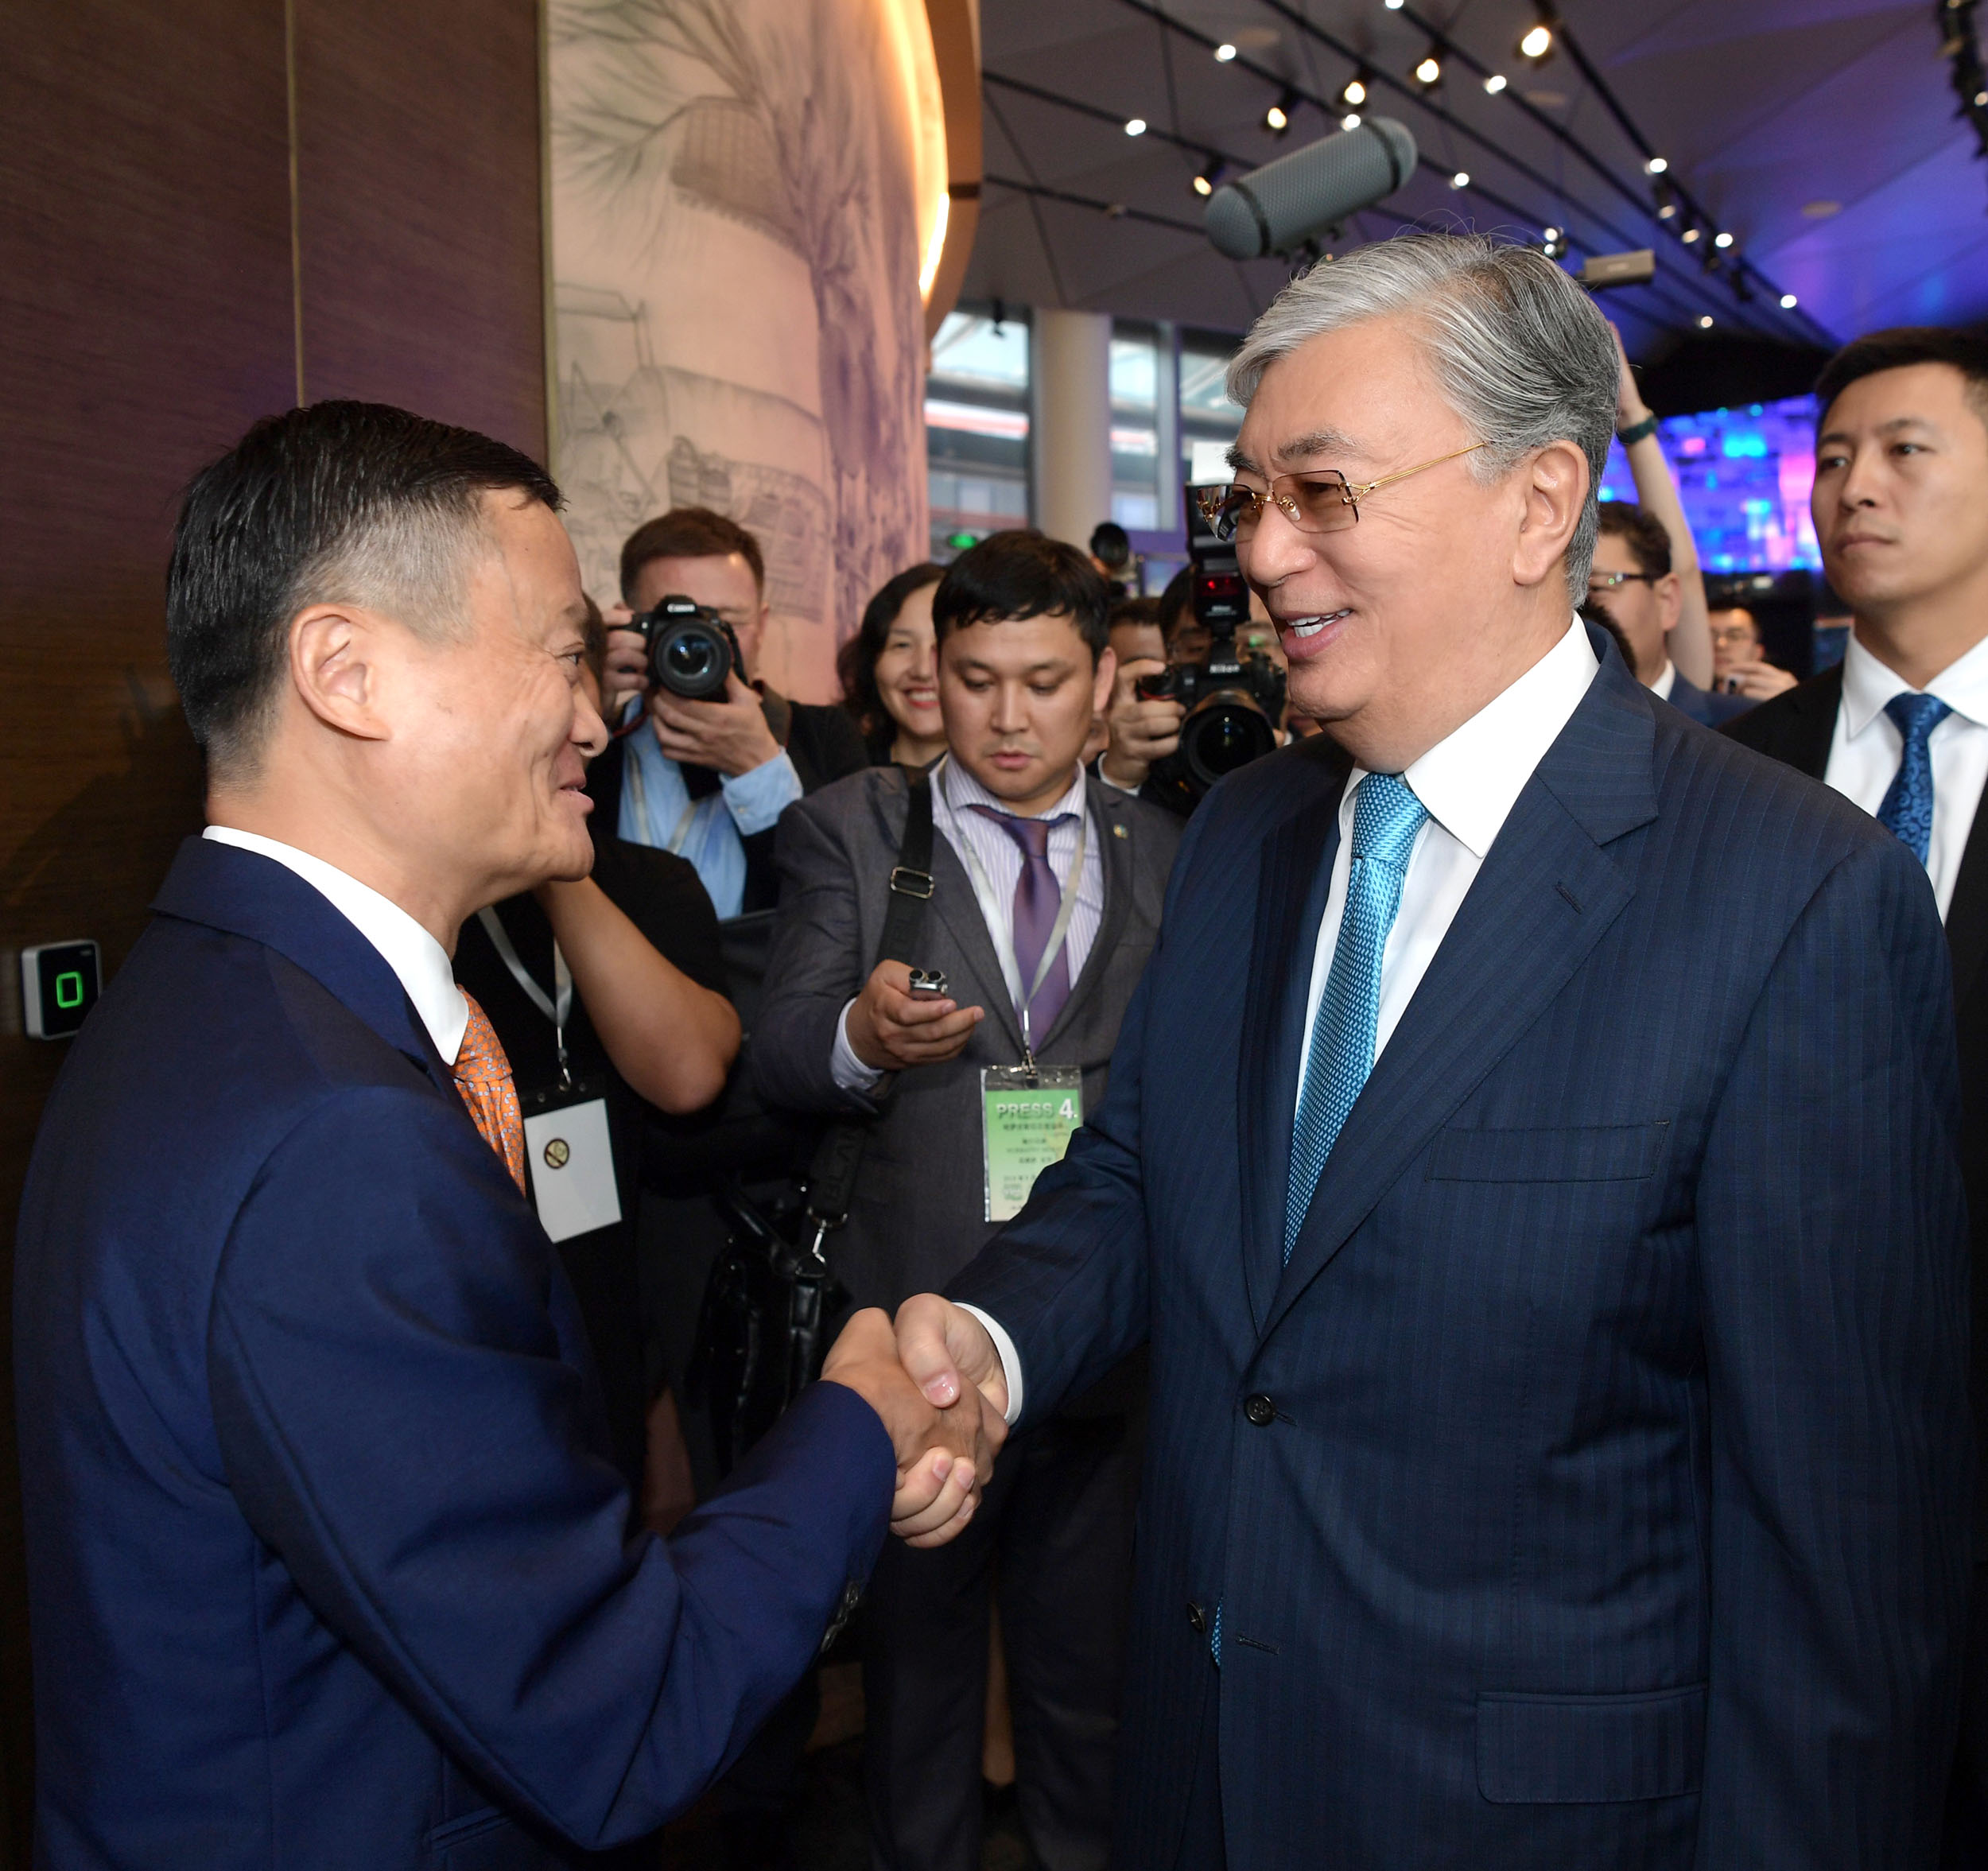 Kassym-Jomart Tokayev meets with the founder of Alibaba Group Jack Ma